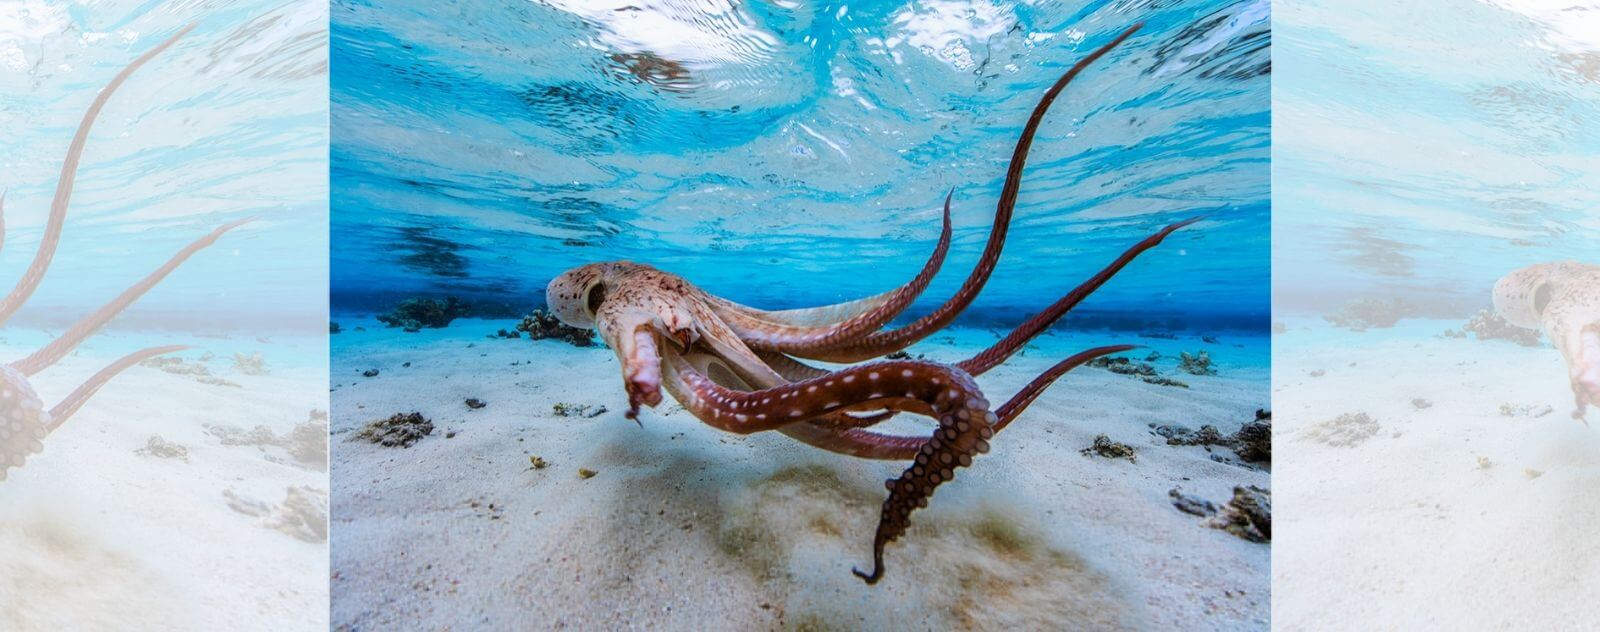 Octopus Swimming with a Severed Arm